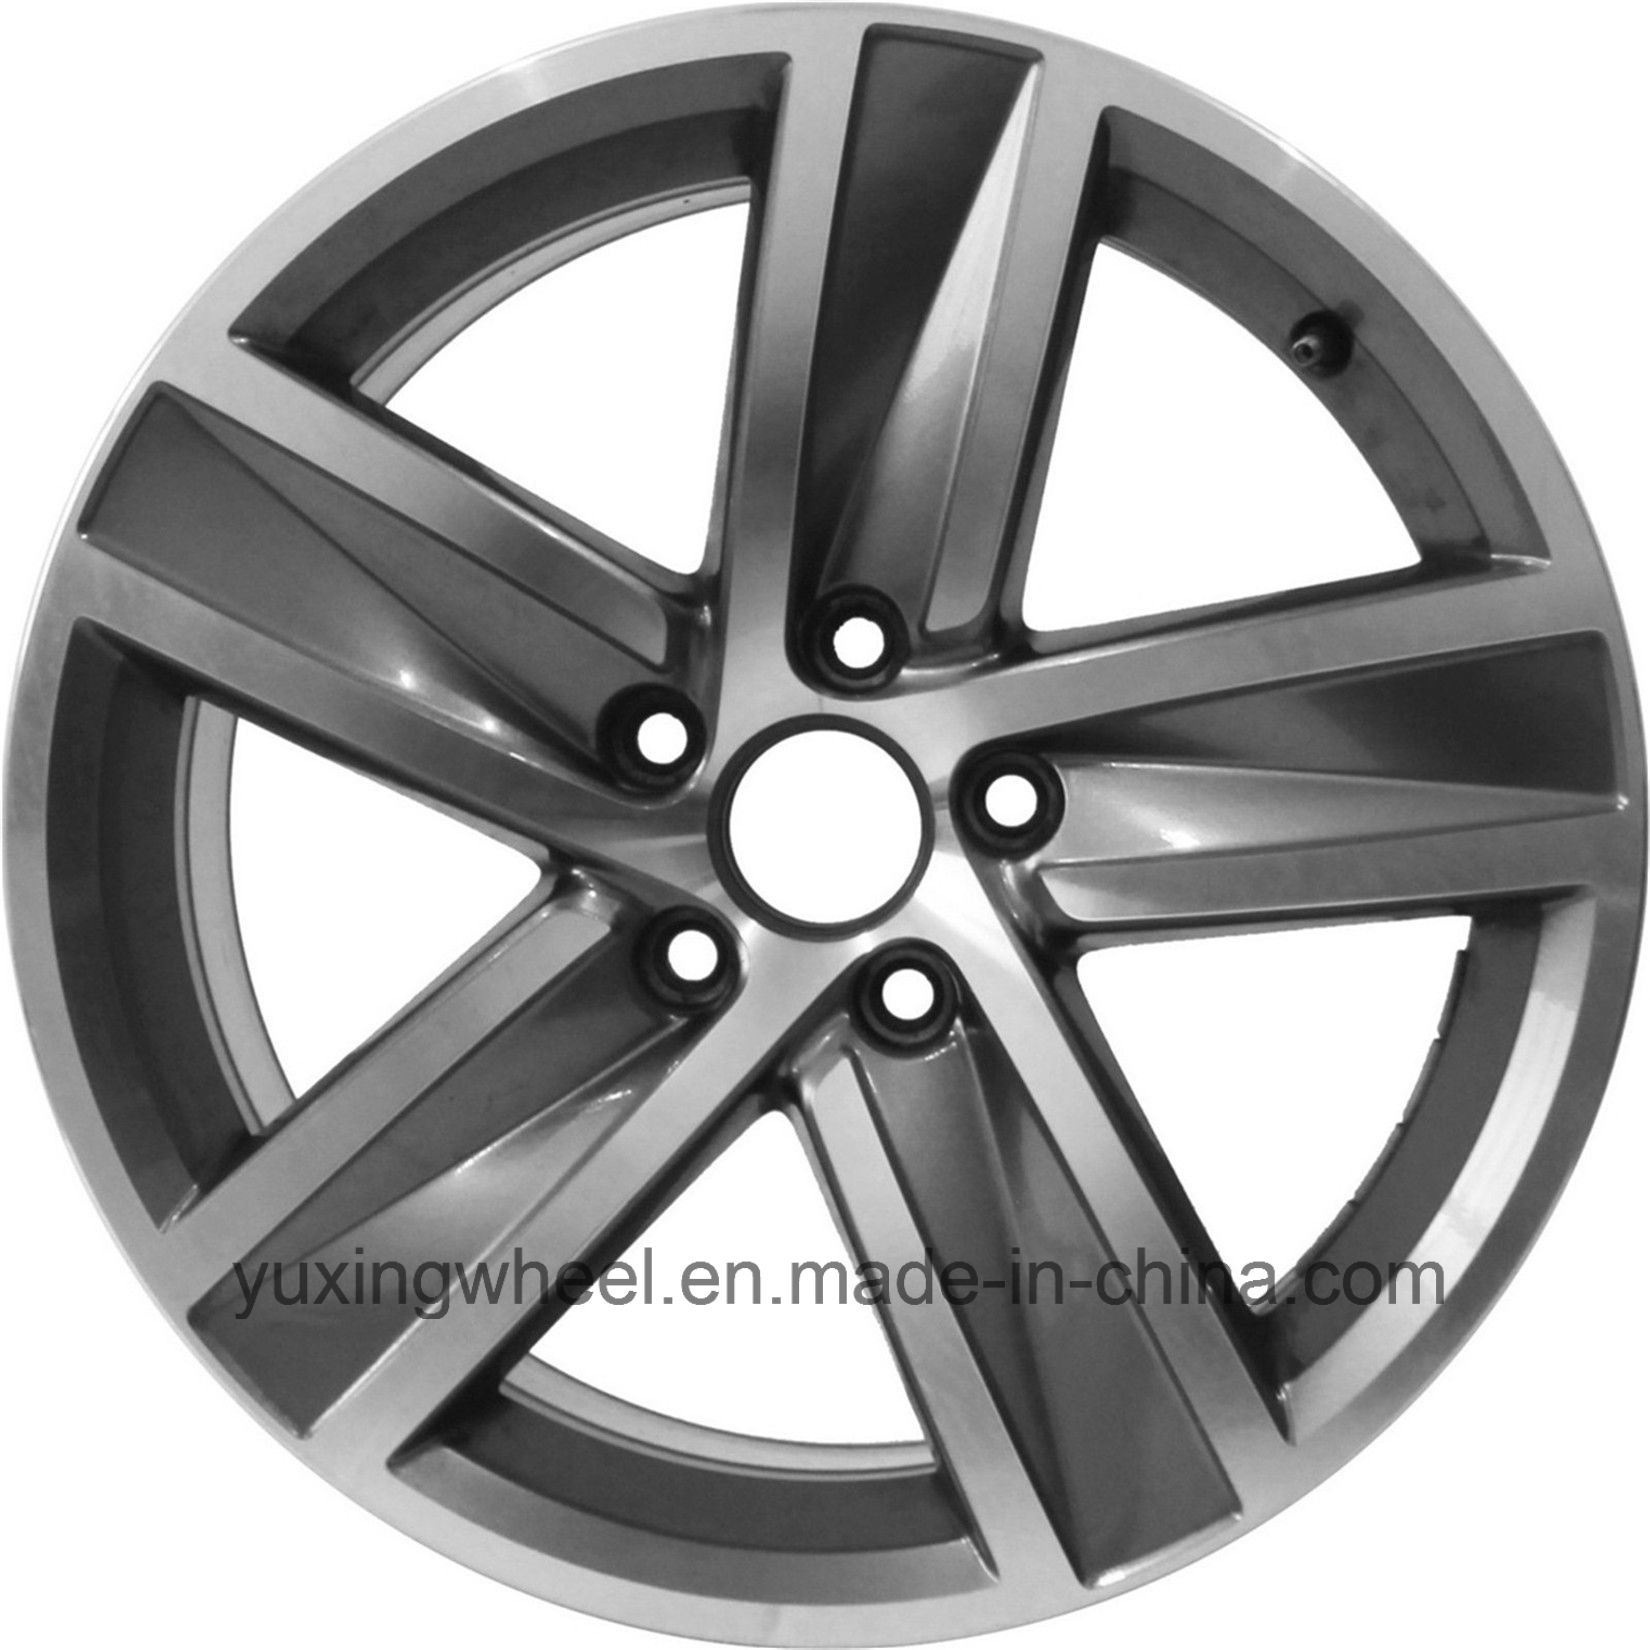 17 Inch High Quality Replica Car Wheel for Volkswagen